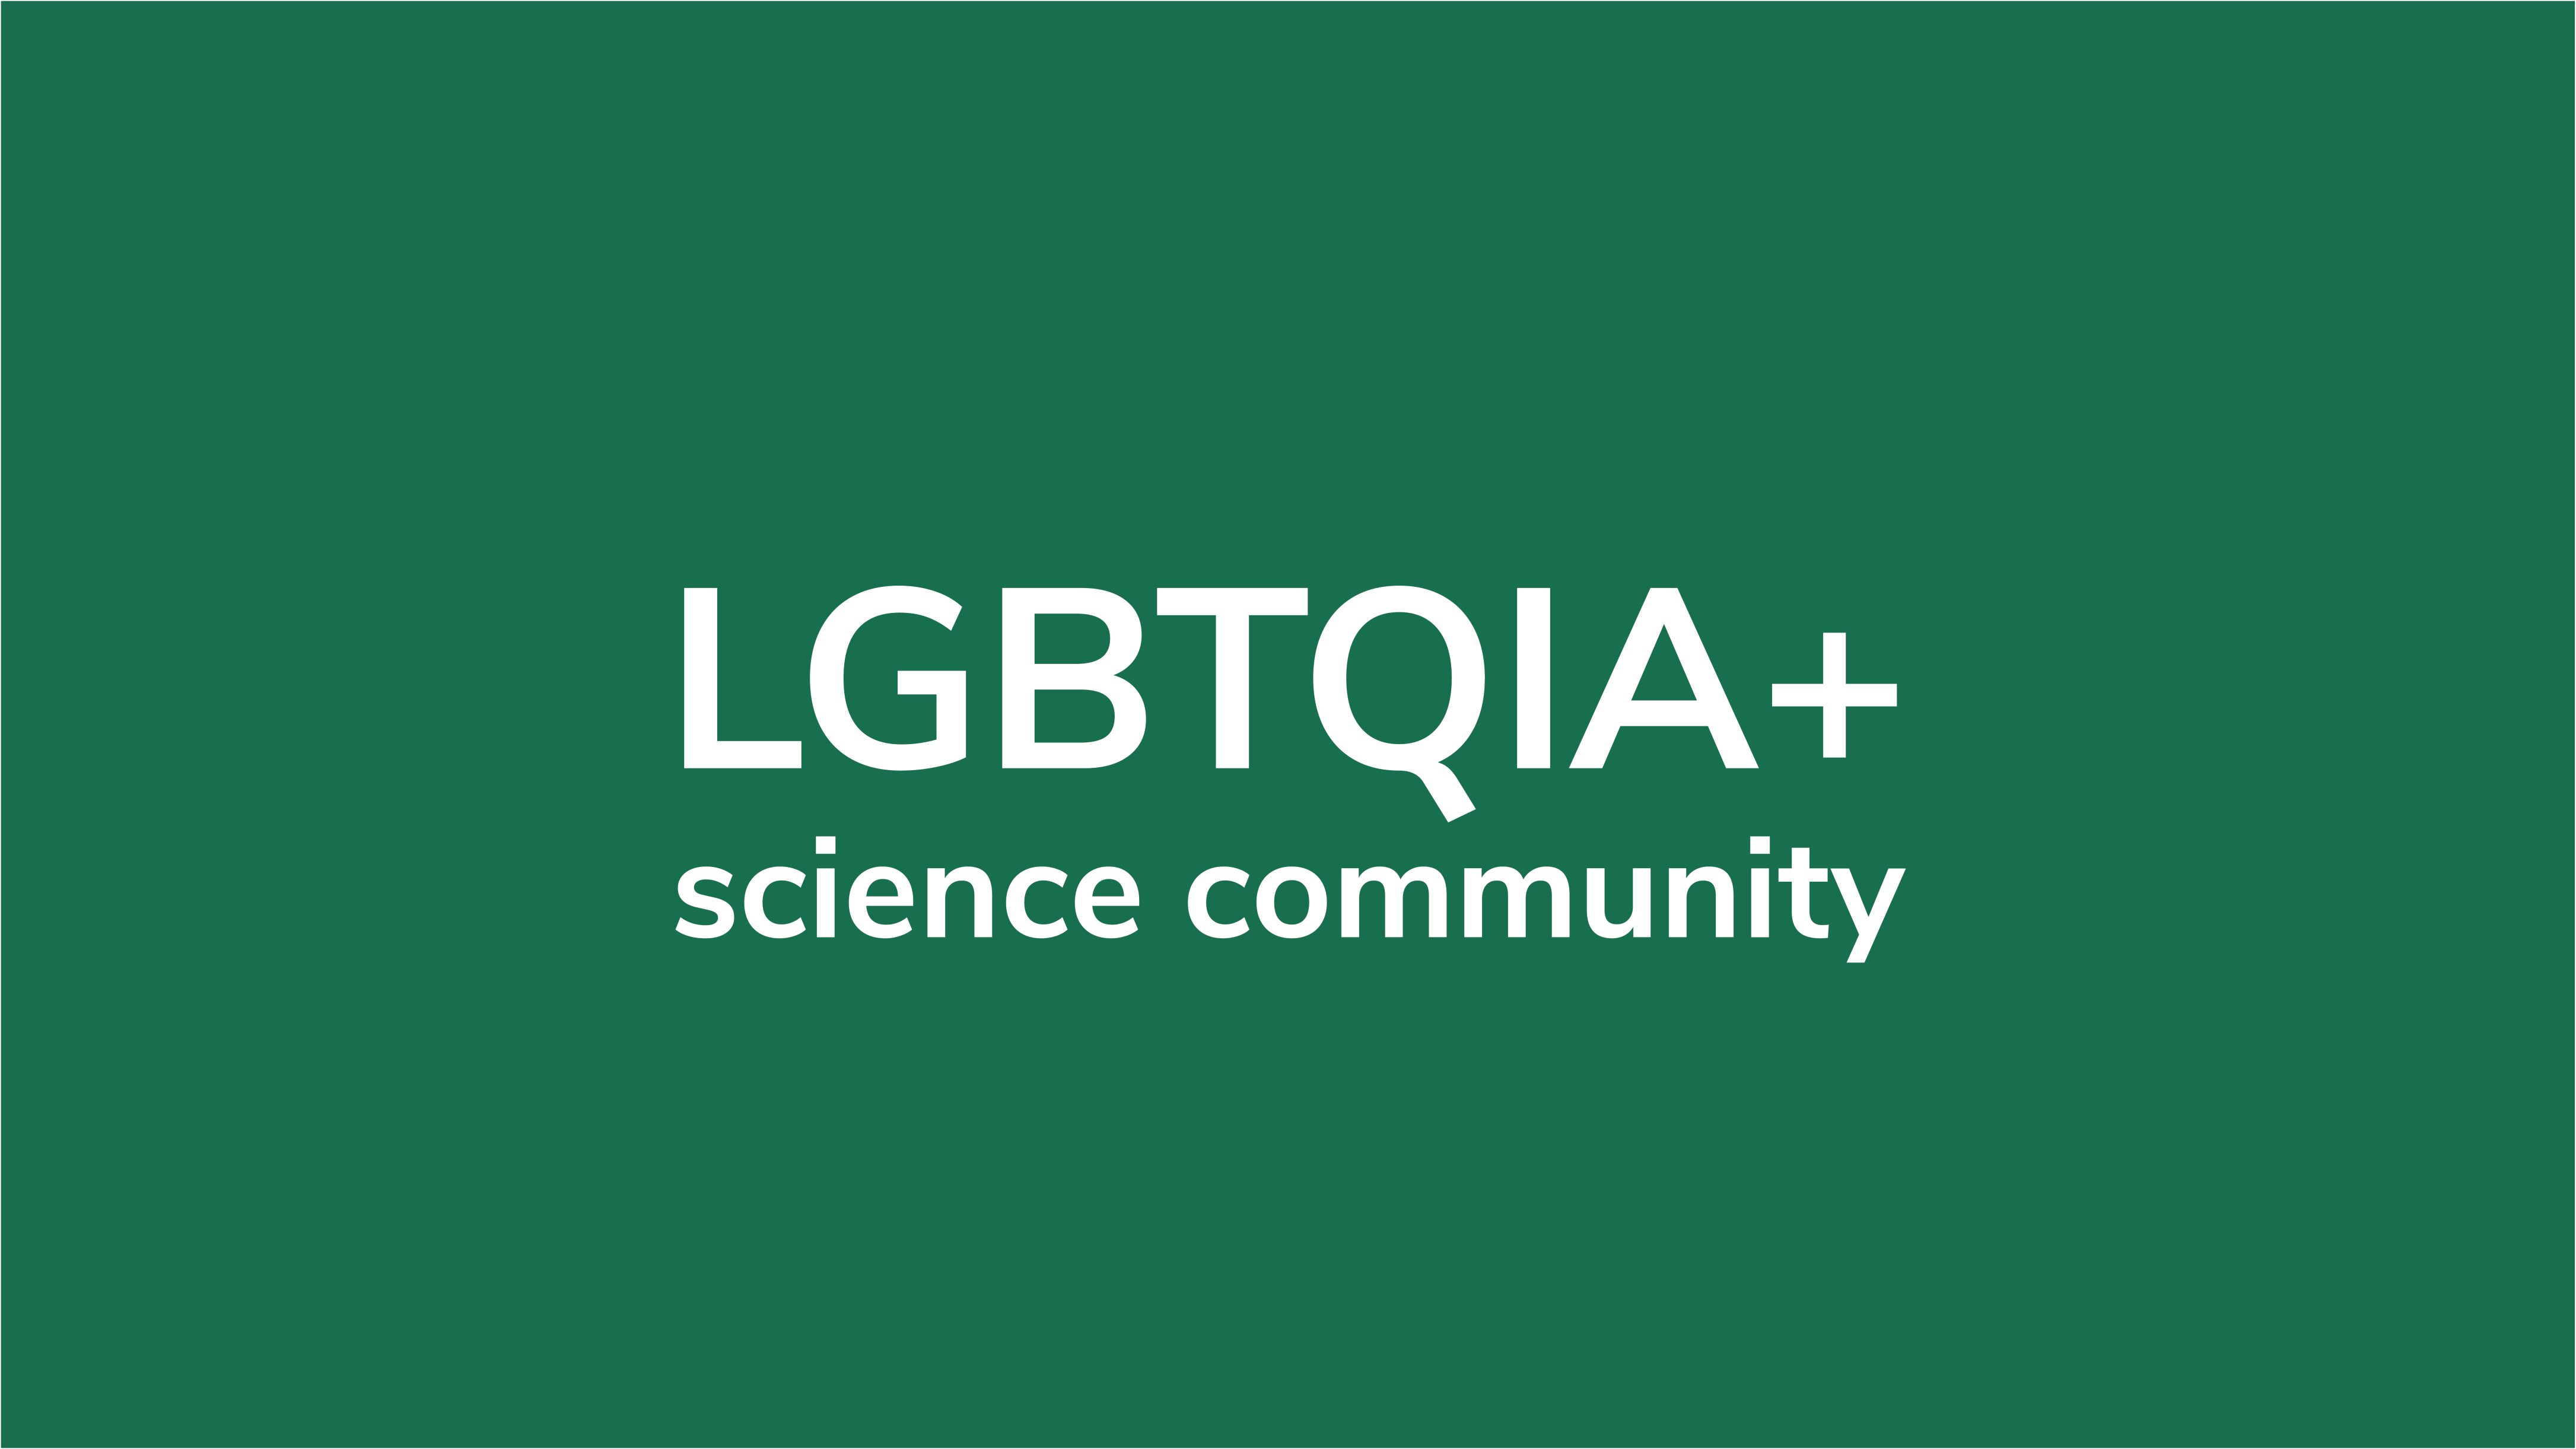 White text on a dark green background that says LGBTQIA+ science community